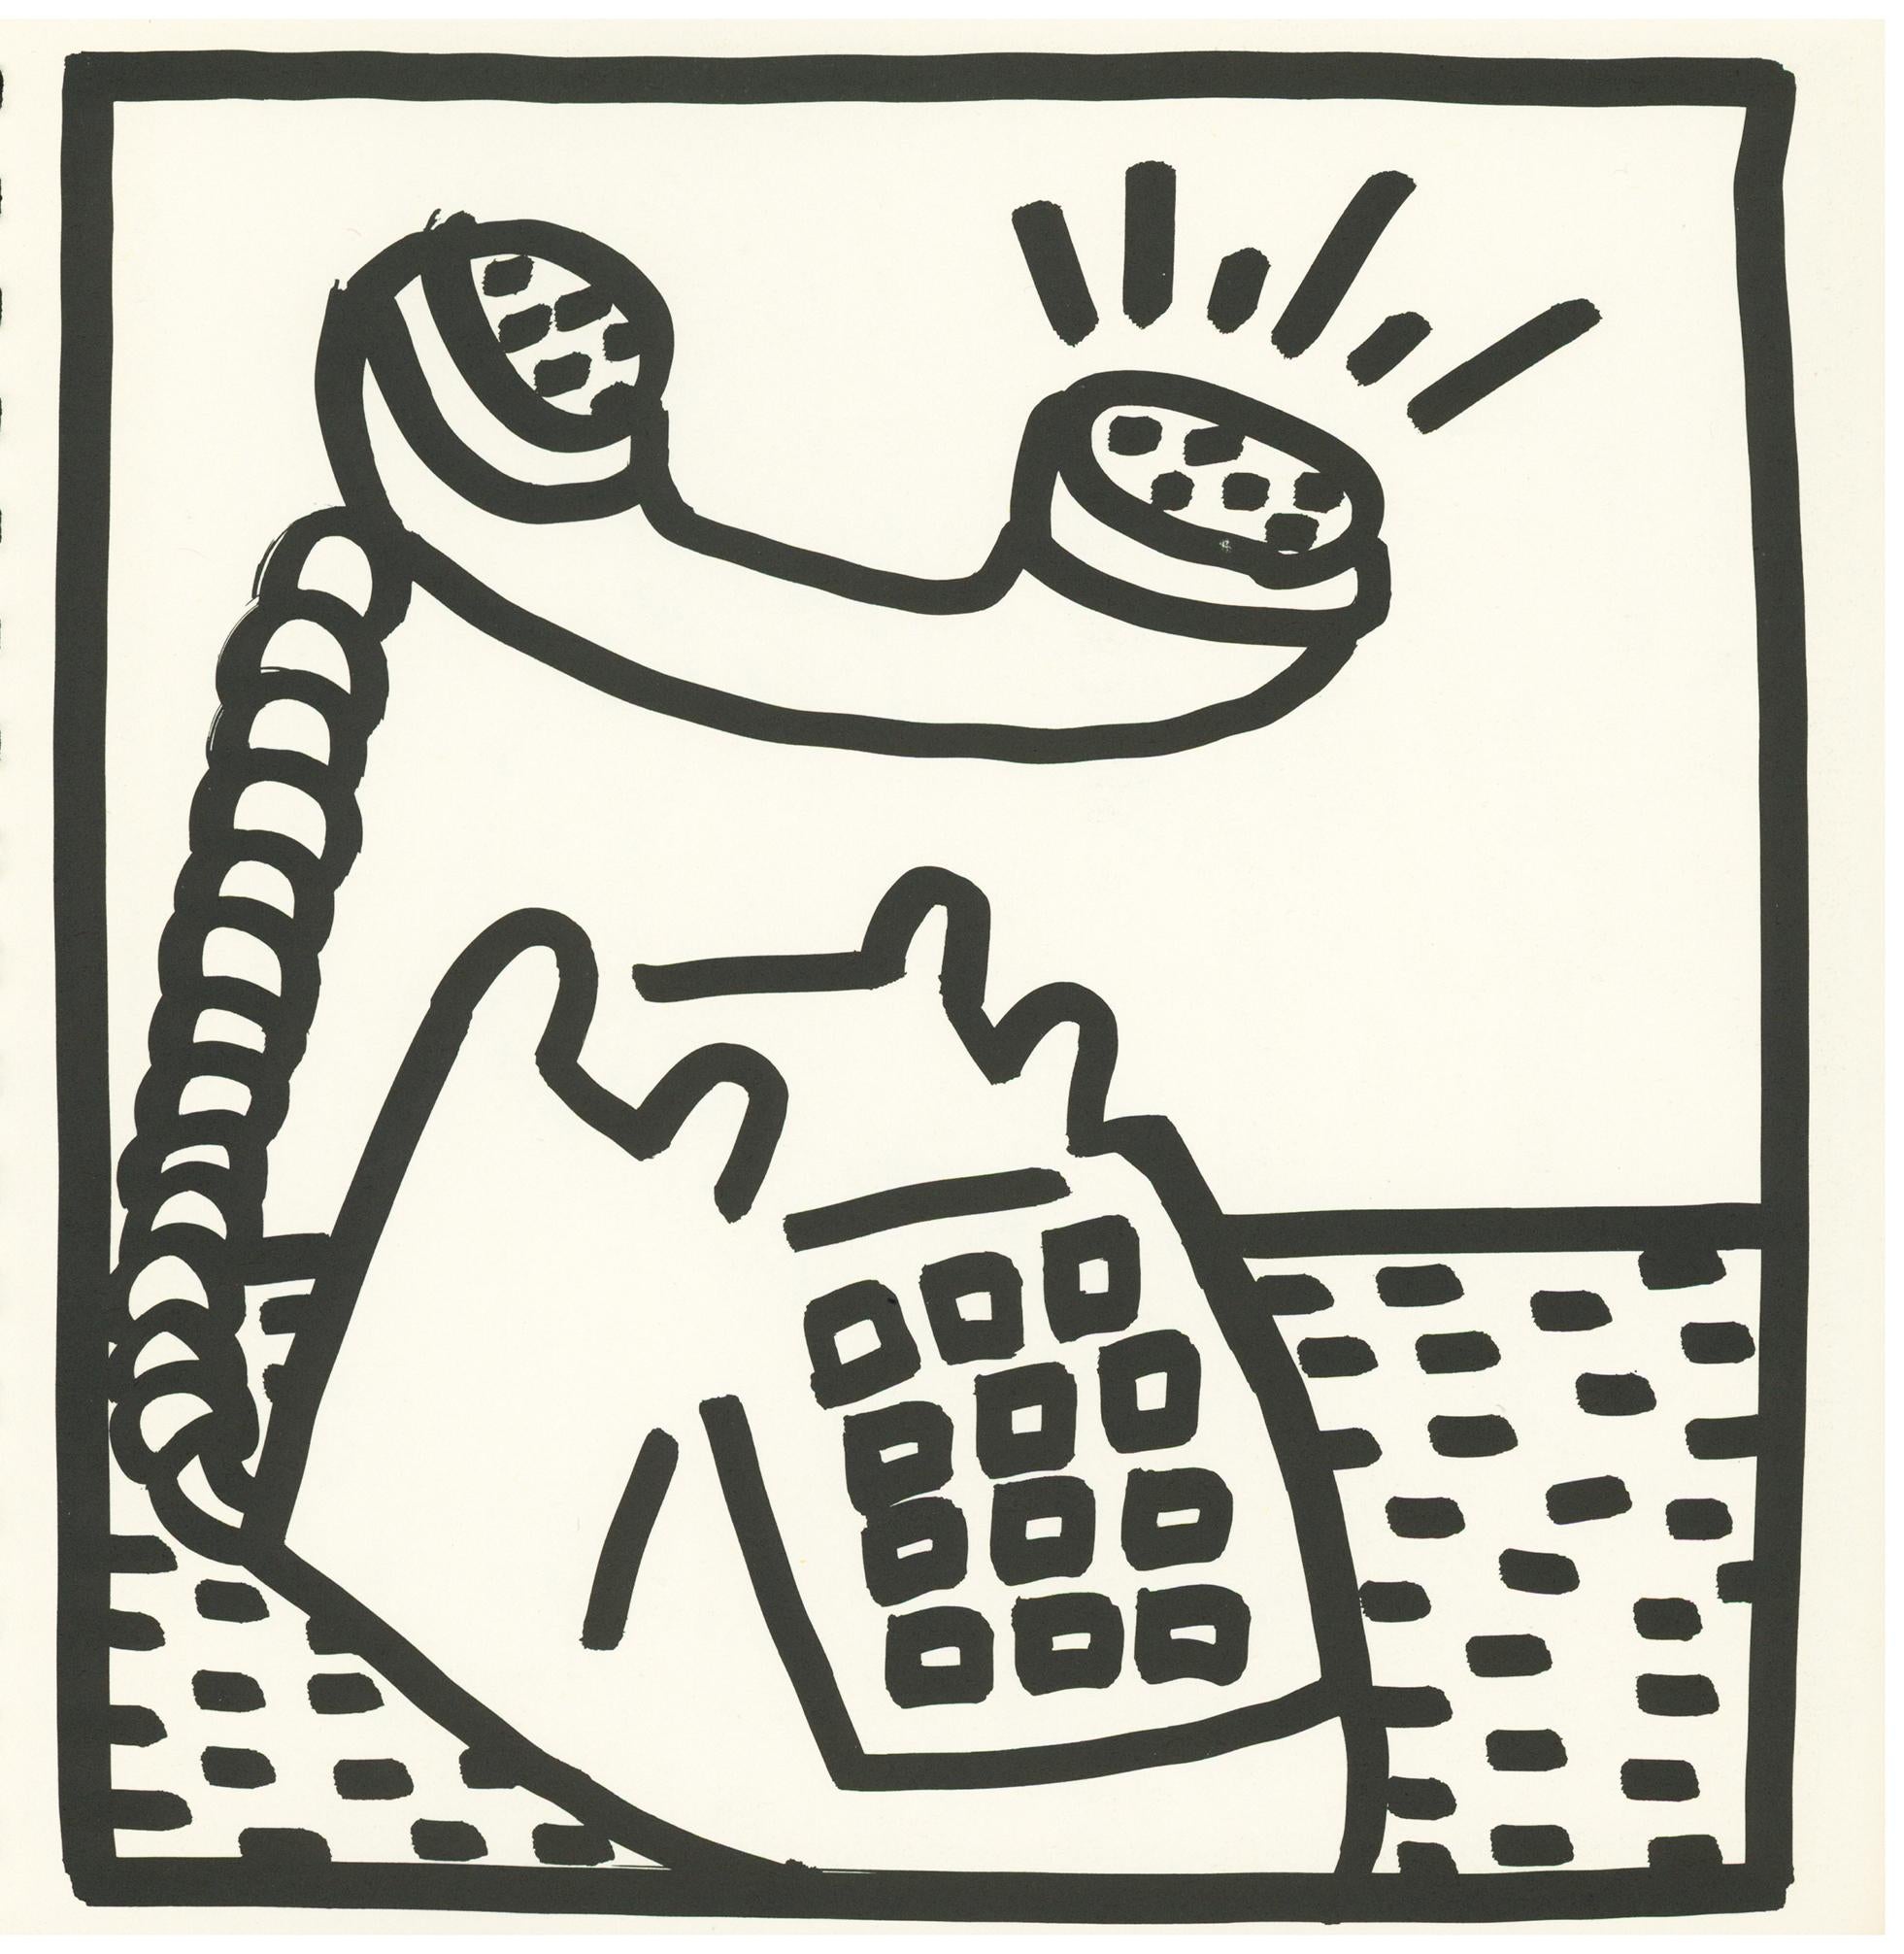 (after) Keith Haring Animal Print - Keith Haring (untitled) Telephone lithograph 1982 (Keith Haring prints) 